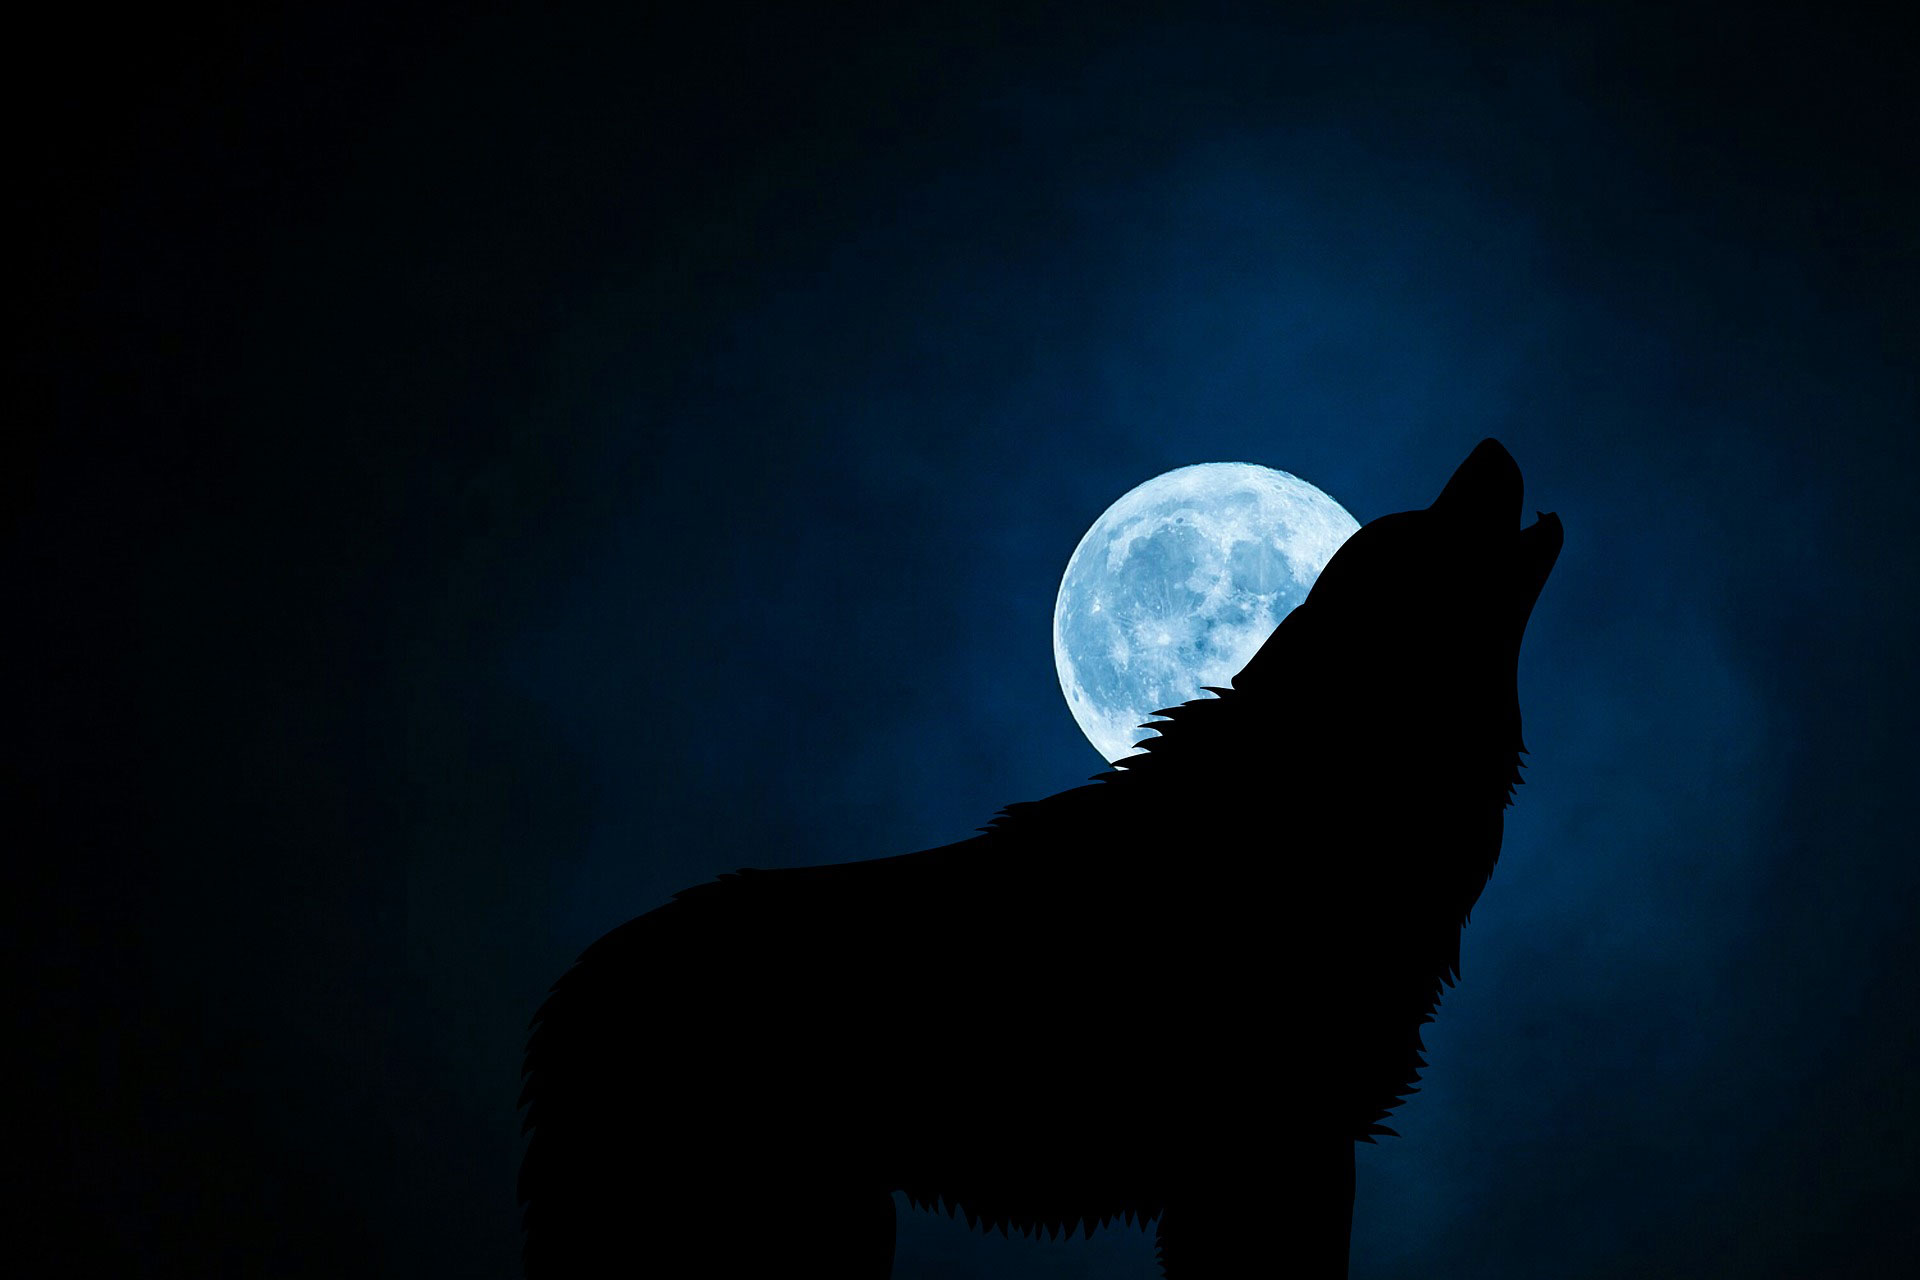 Worldwide Howl at the Moon Night